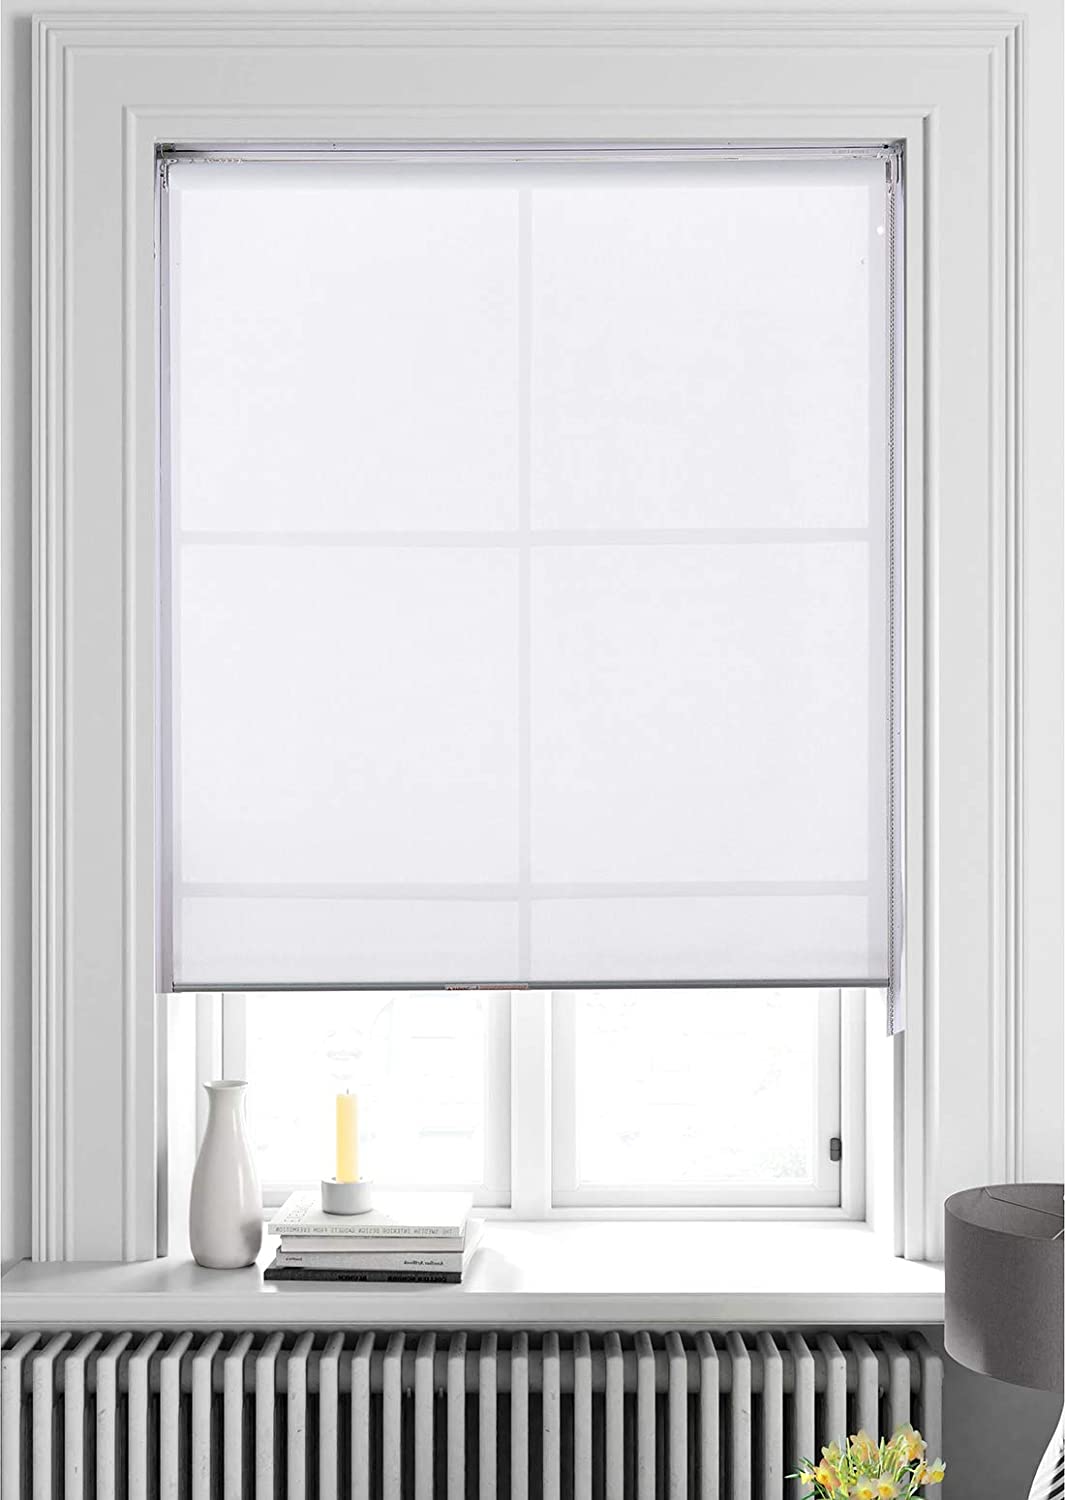 Our Brand Ox Malacca Light Filtering Roller Shade